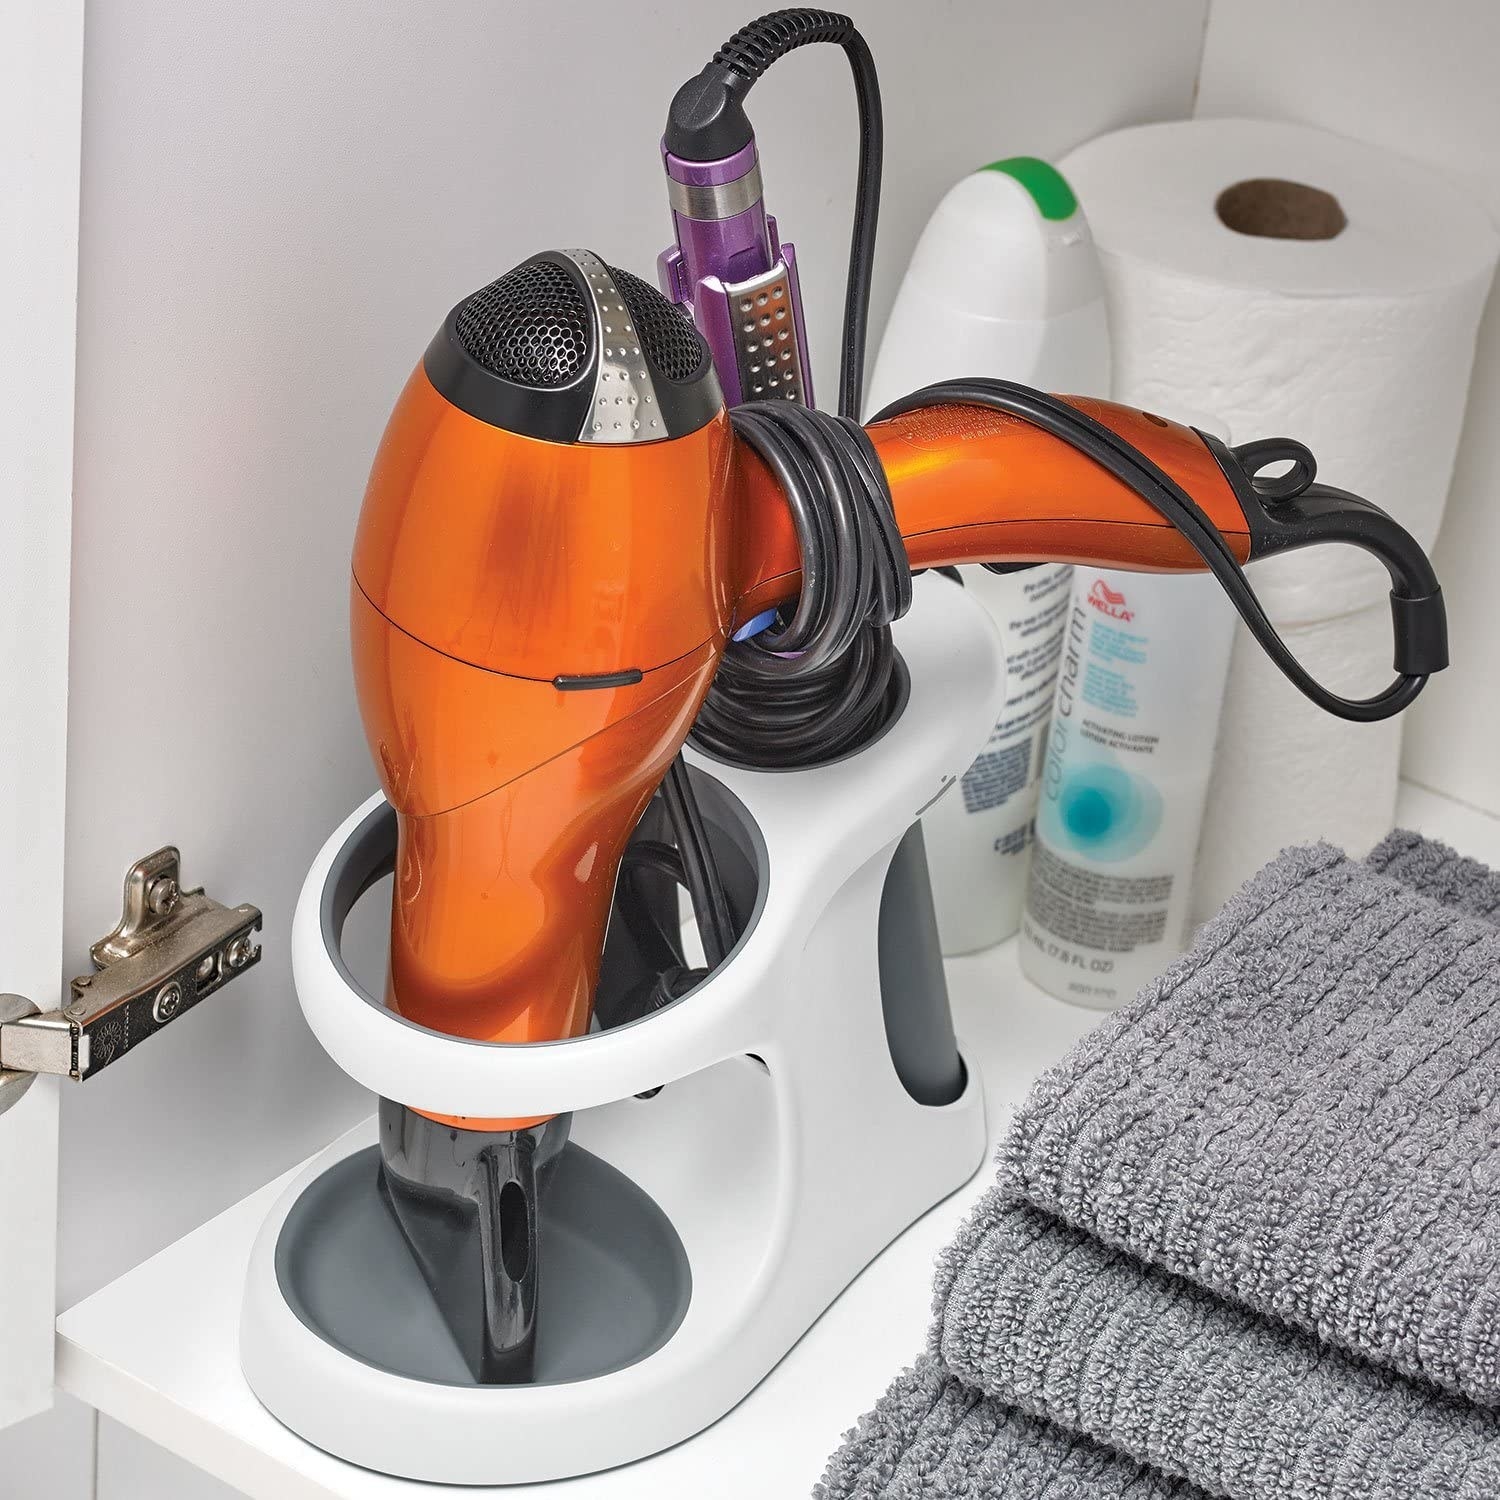 A close up of the holster in a bathroom cupboard holding a hair dryer and a straightener